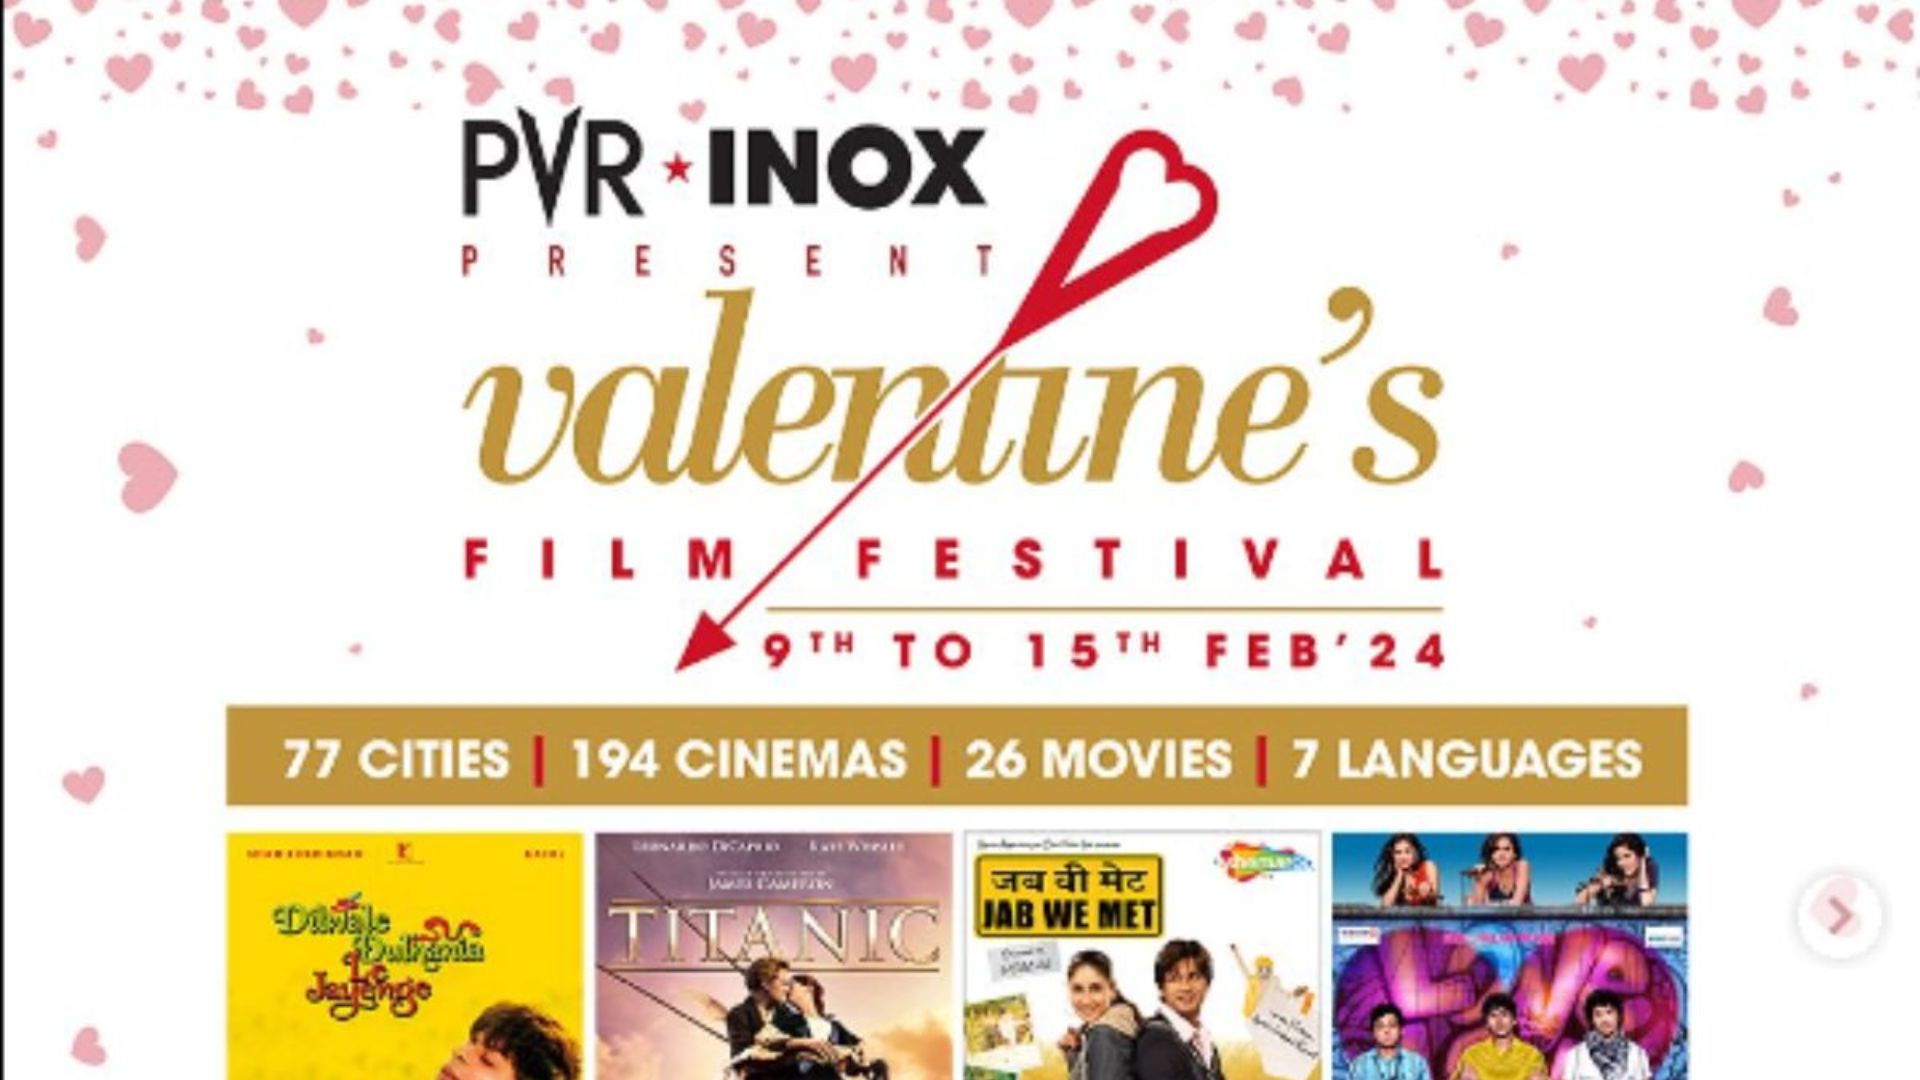 PVR INOX Valentine’s Film Festival about to end! Don’t miss it